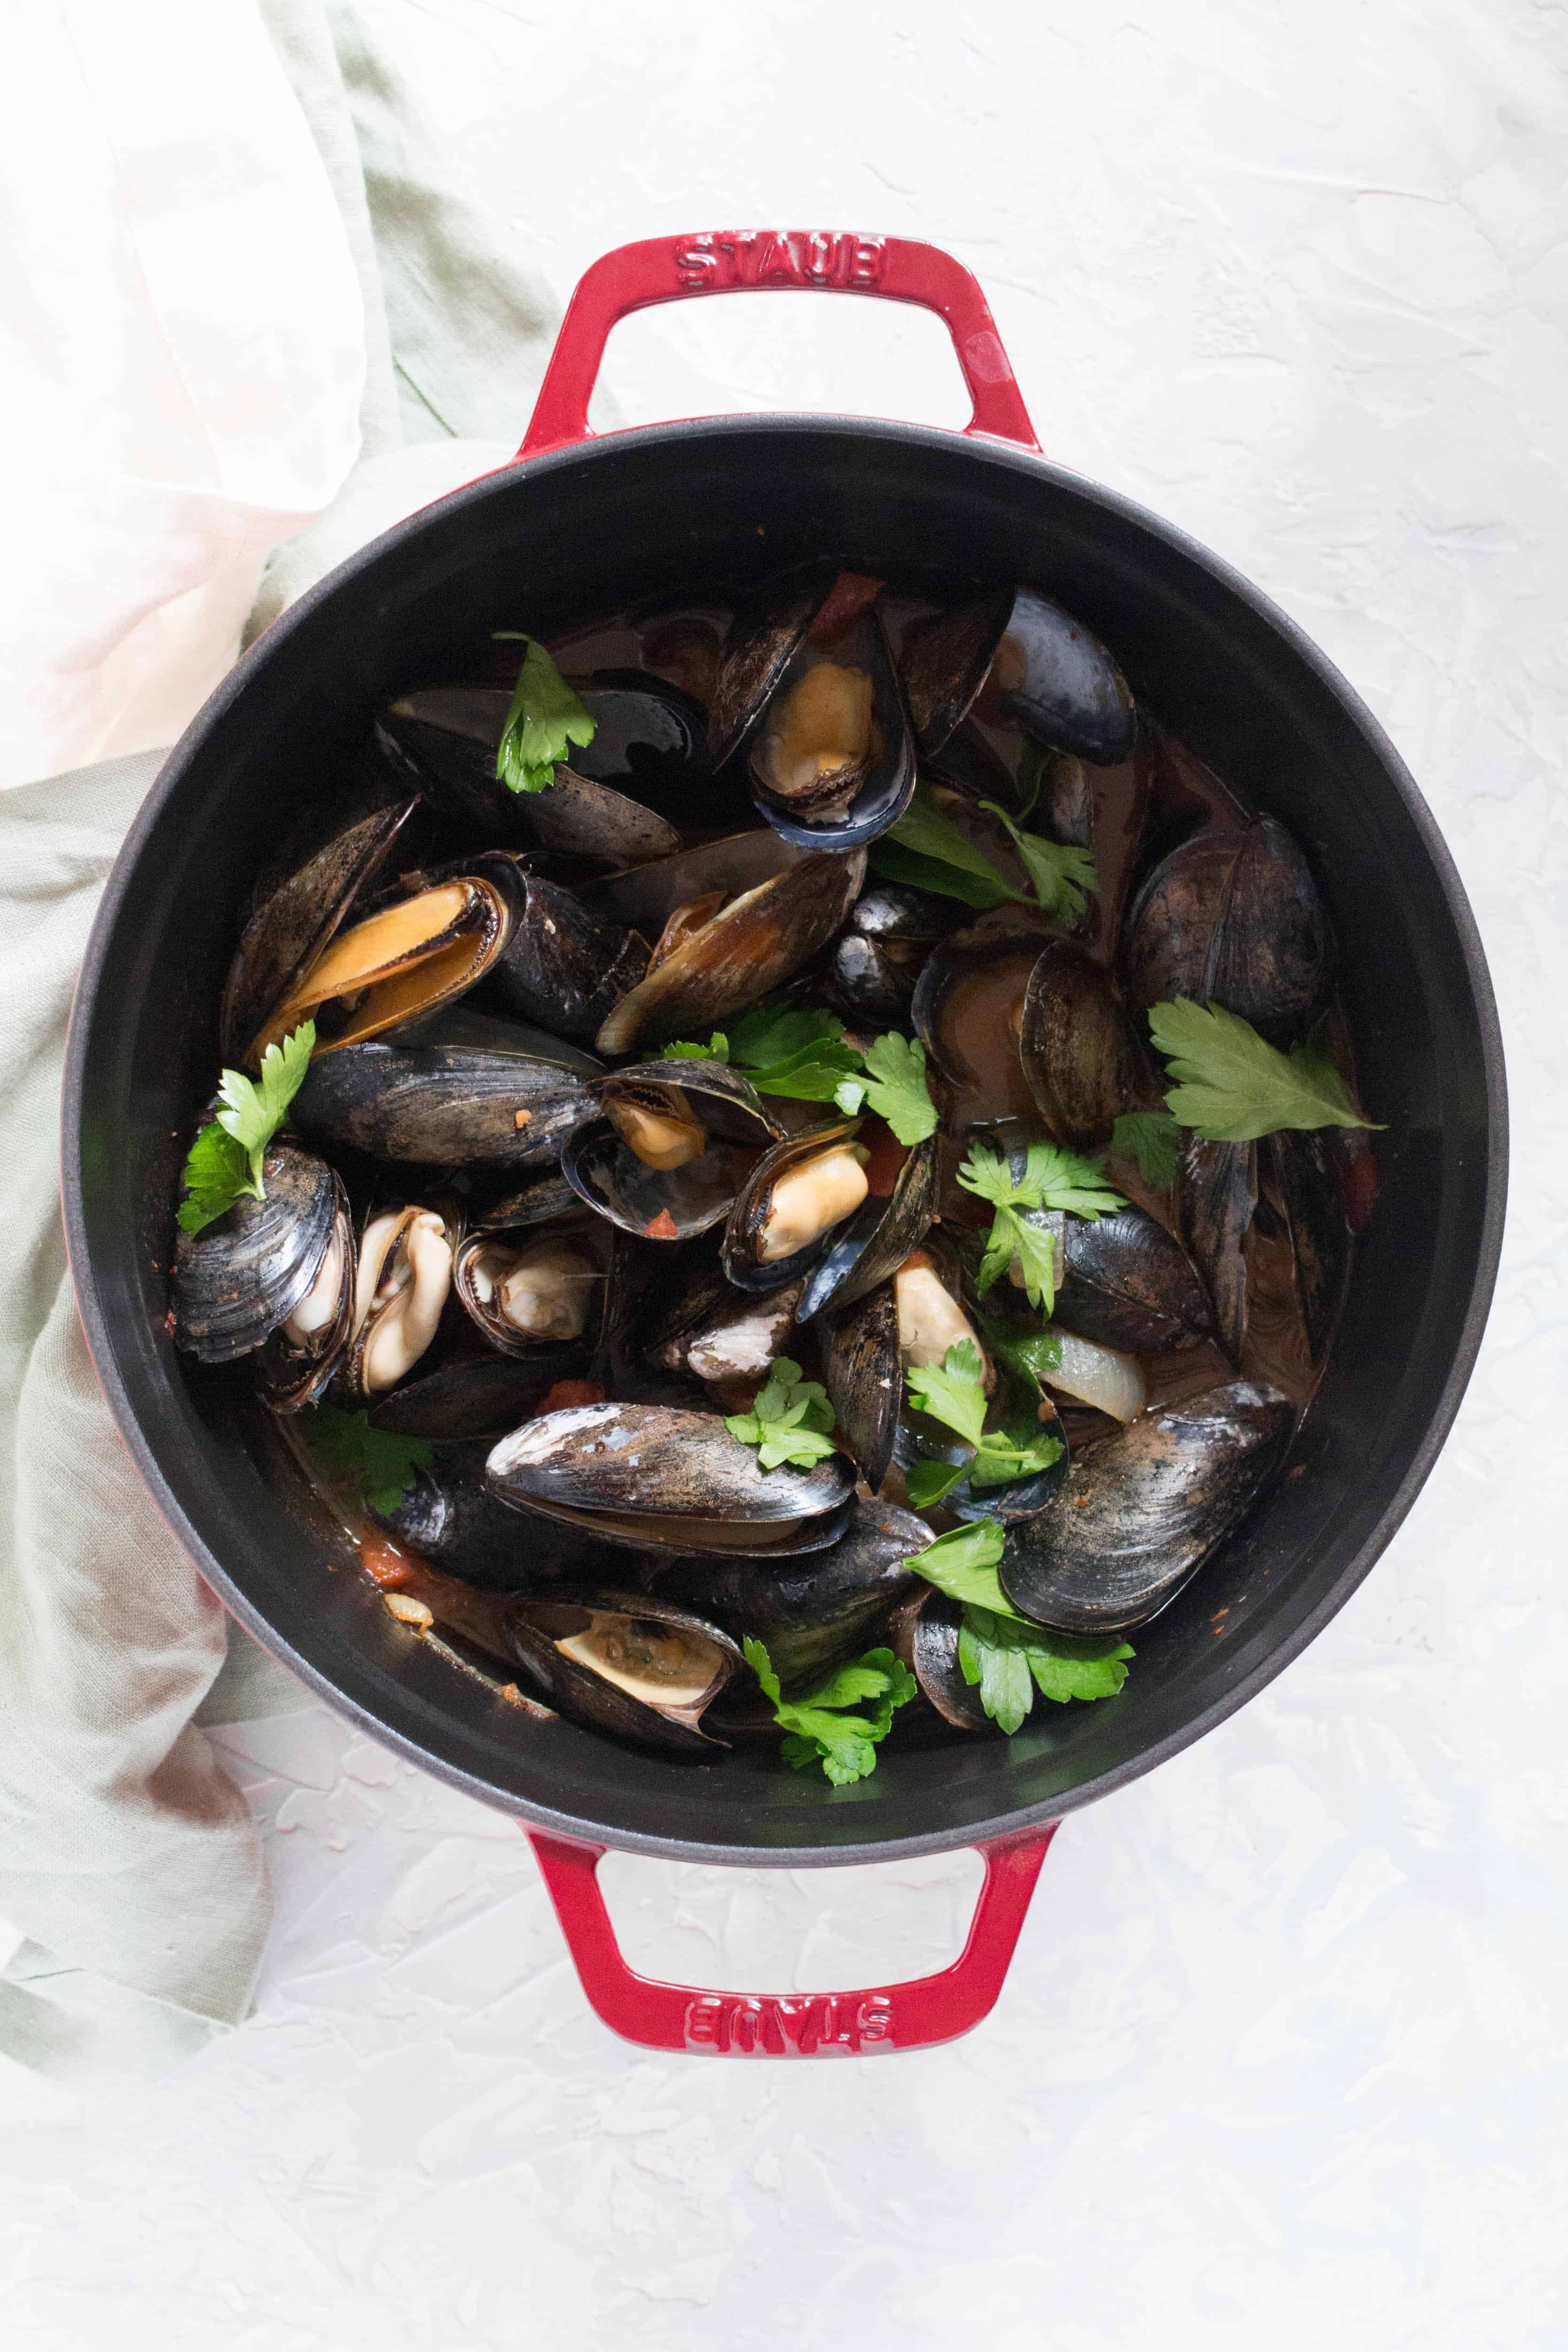 Looking for an easy recipe that looks impressive but takes little to no effort to put together? This Spicy Steamed Mussels is perfect!